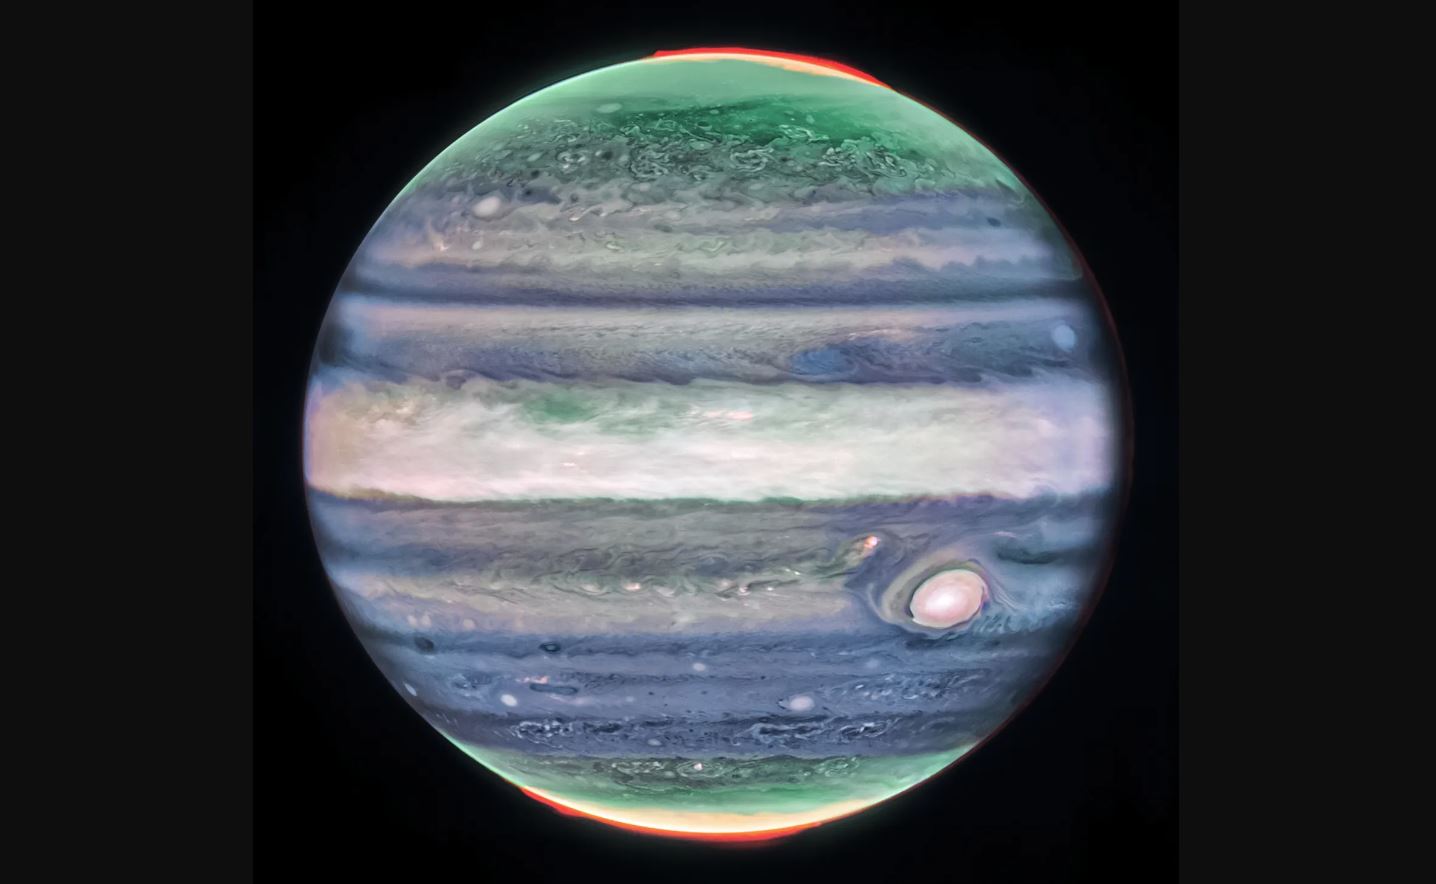 Jupiter’s giant jet stream would put Earth’s hurricanes to shame